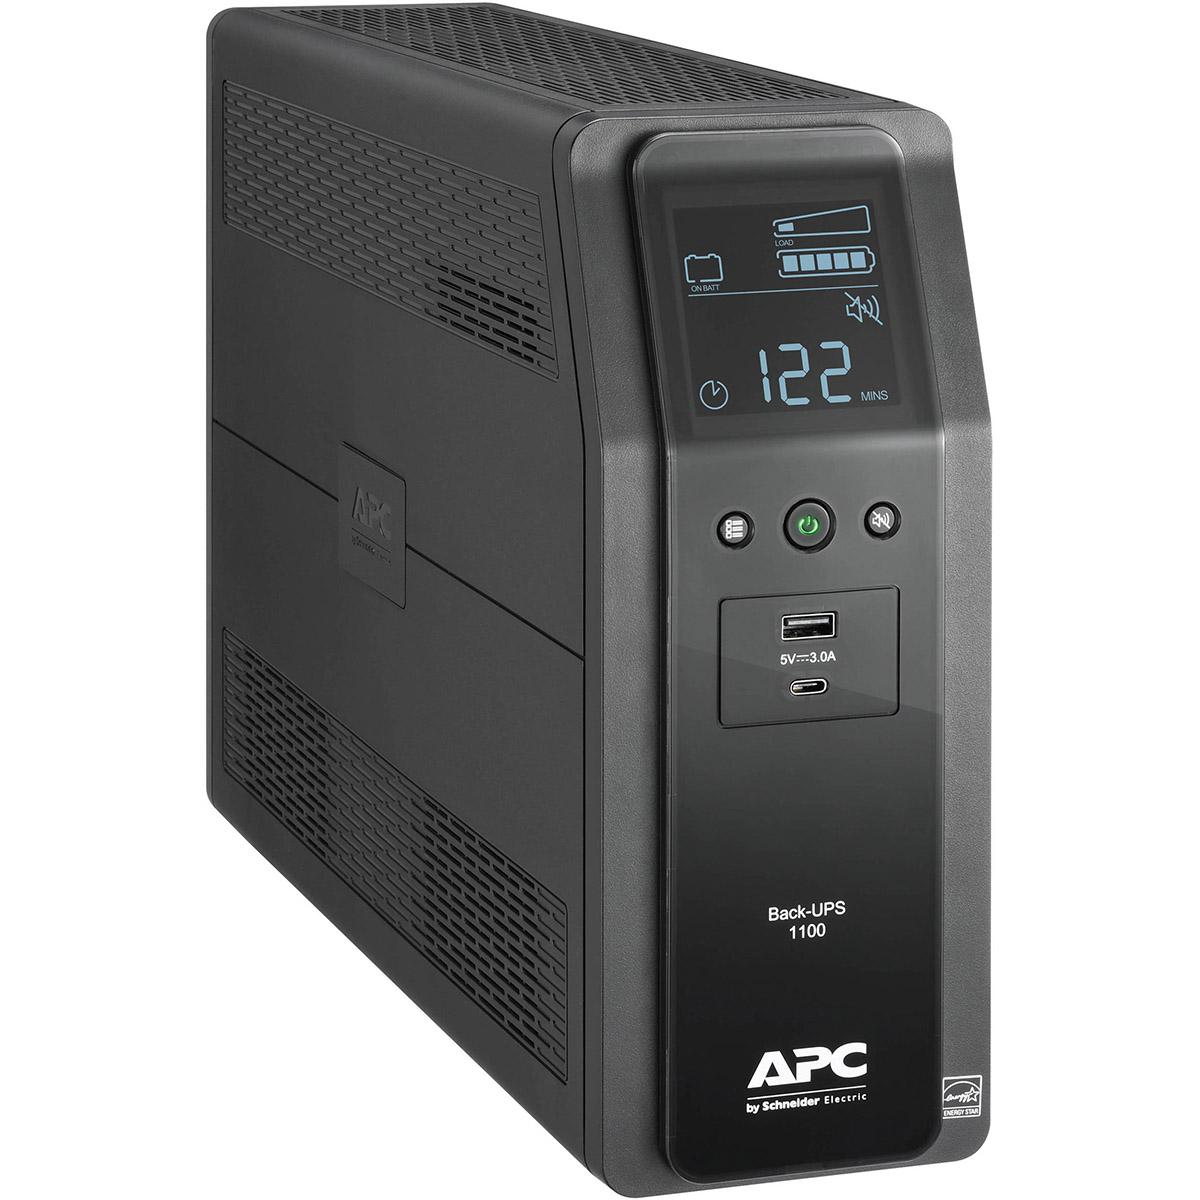 APC BN1100M2 10-Outlet 1100VA Back-UPS Pro Battery Back-Up System for $99.99 Shipped